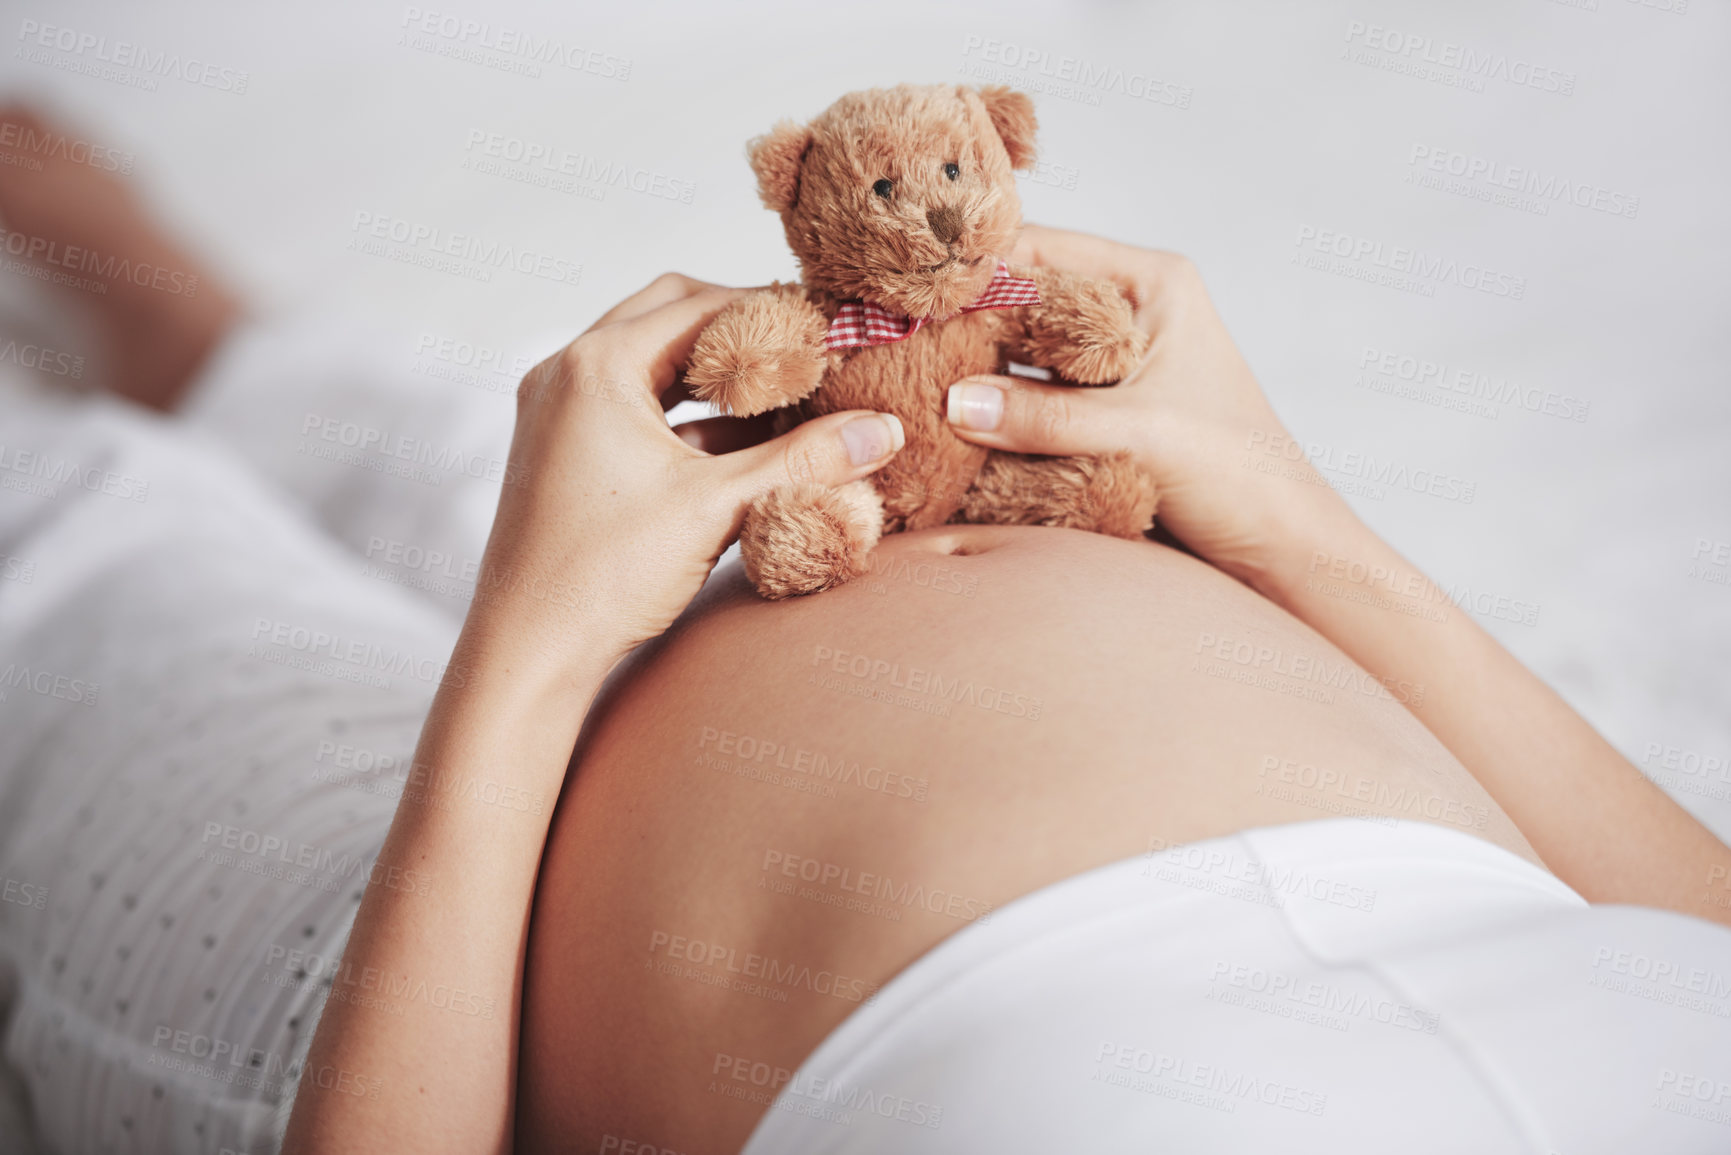 Buy stock photo Shot of a pregnant woman holding a teddy bear on top of her belly